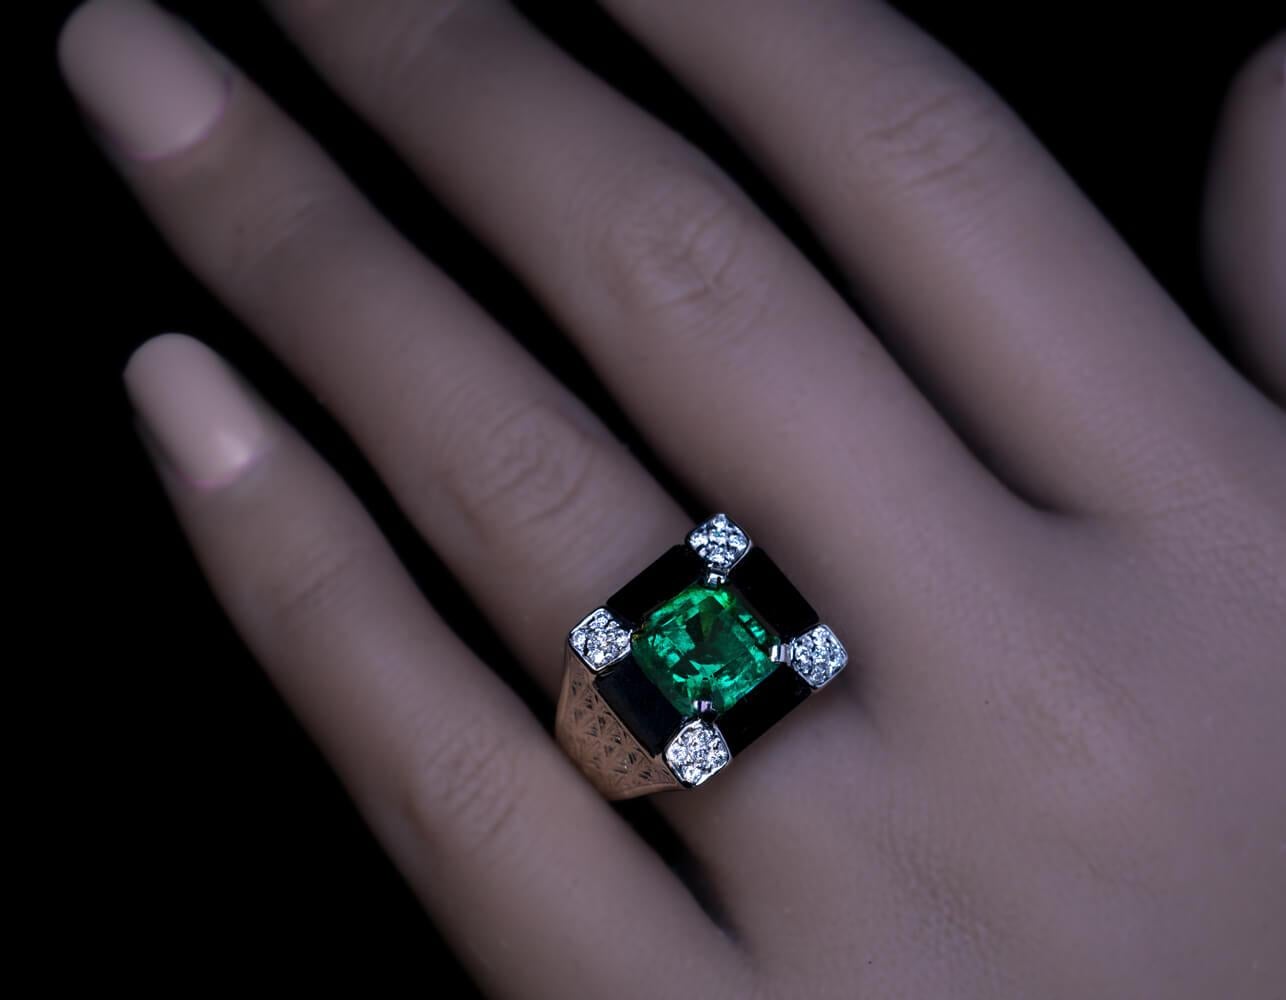 French, circa 1930  This one-of-a-kind Art Deco ring is crafted in 18K pale yellow gold and platinum. It features an excellent 2.72 ct square shape Colombian emerald of vivid bluish green color. The emerald is set in a rectangular pyramid-shaped